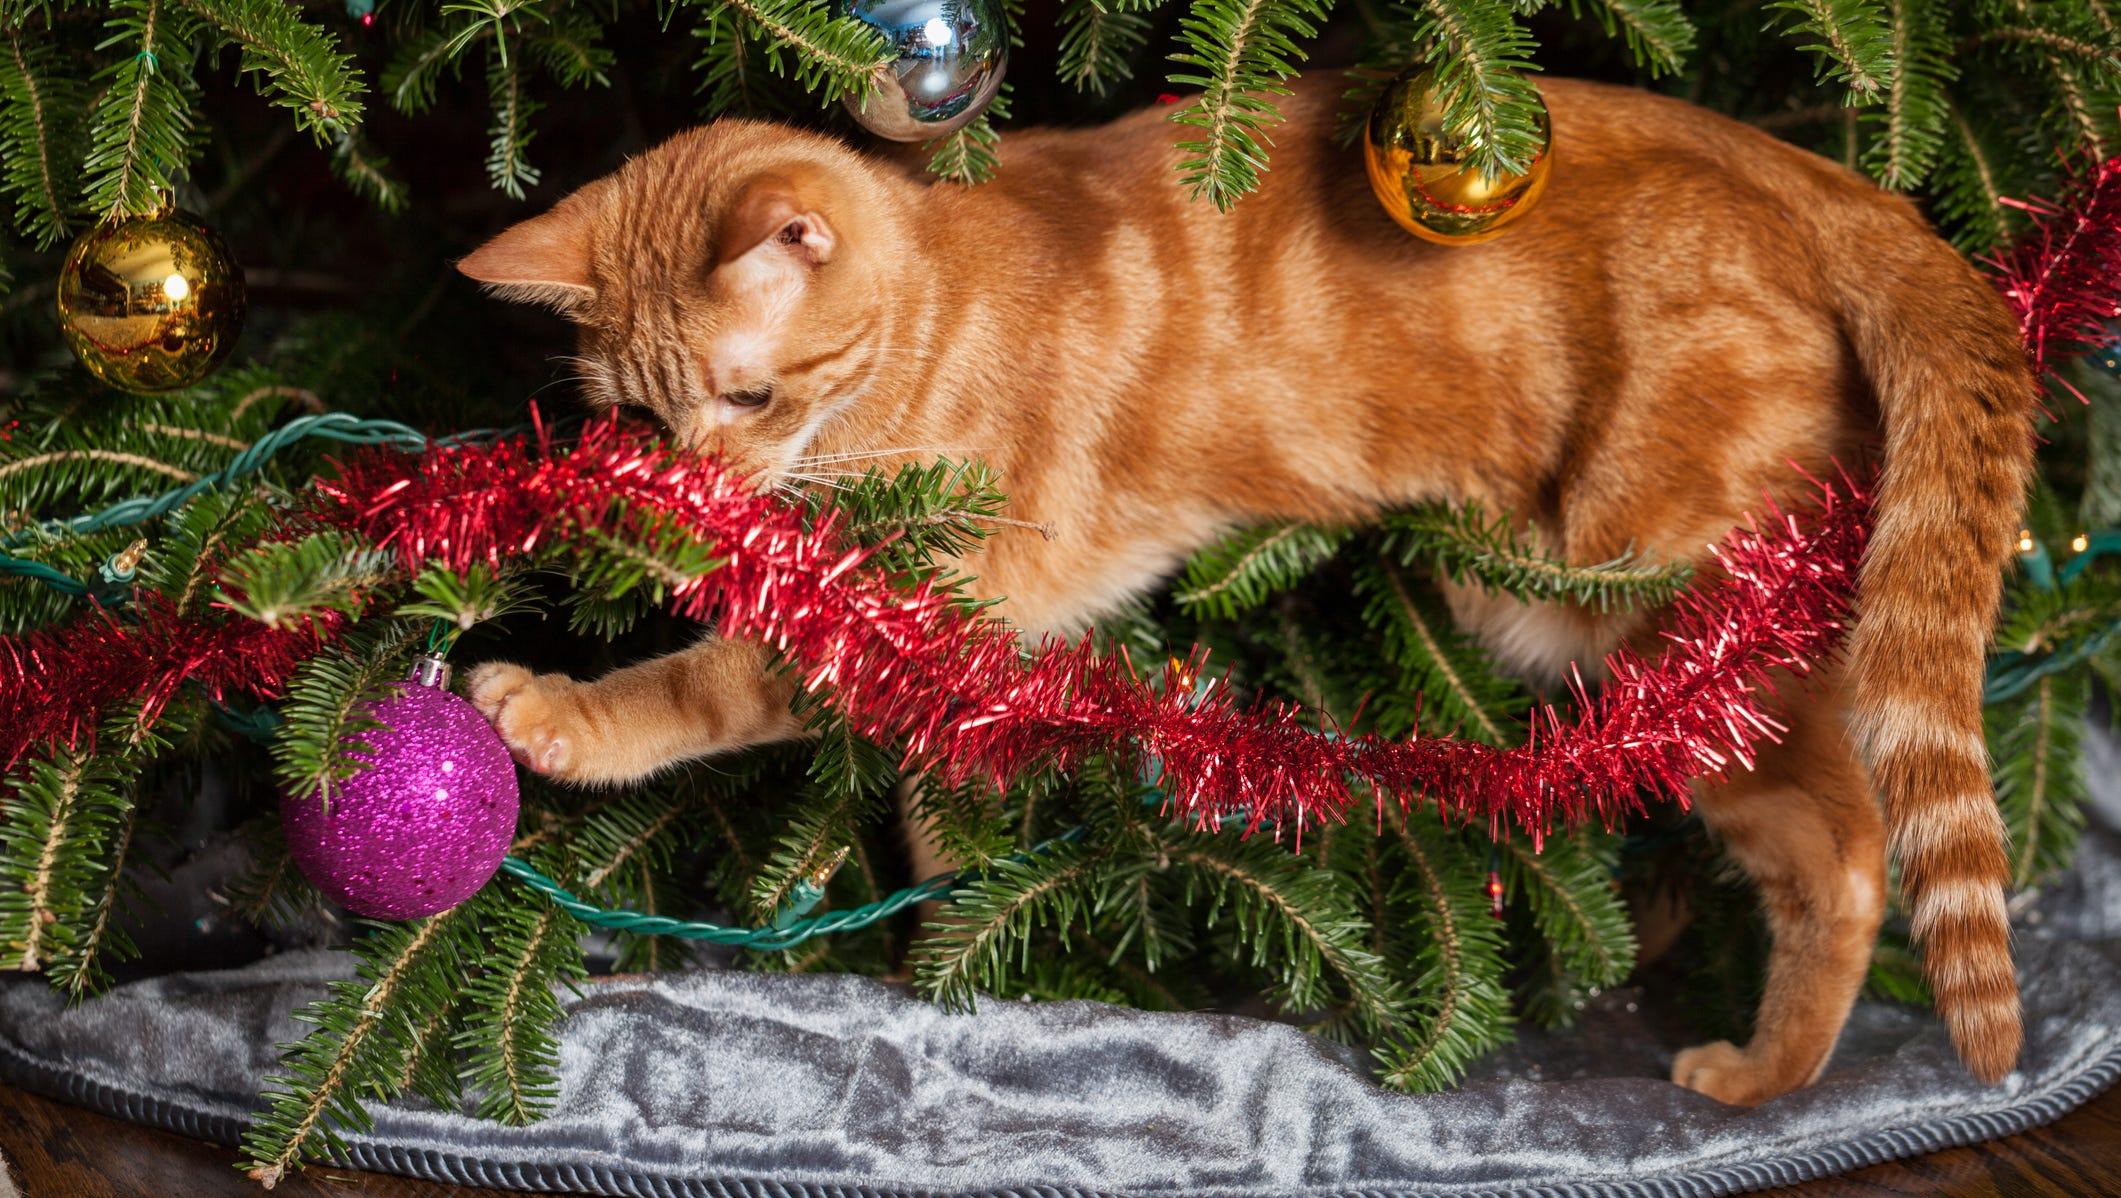 A common Yuletide cat-owner complaint: Cats climbing trees, knocking off ornaments and even tipping trees over. But some cat owners have an even messier problem when it comes to their felines and Christmas trees.